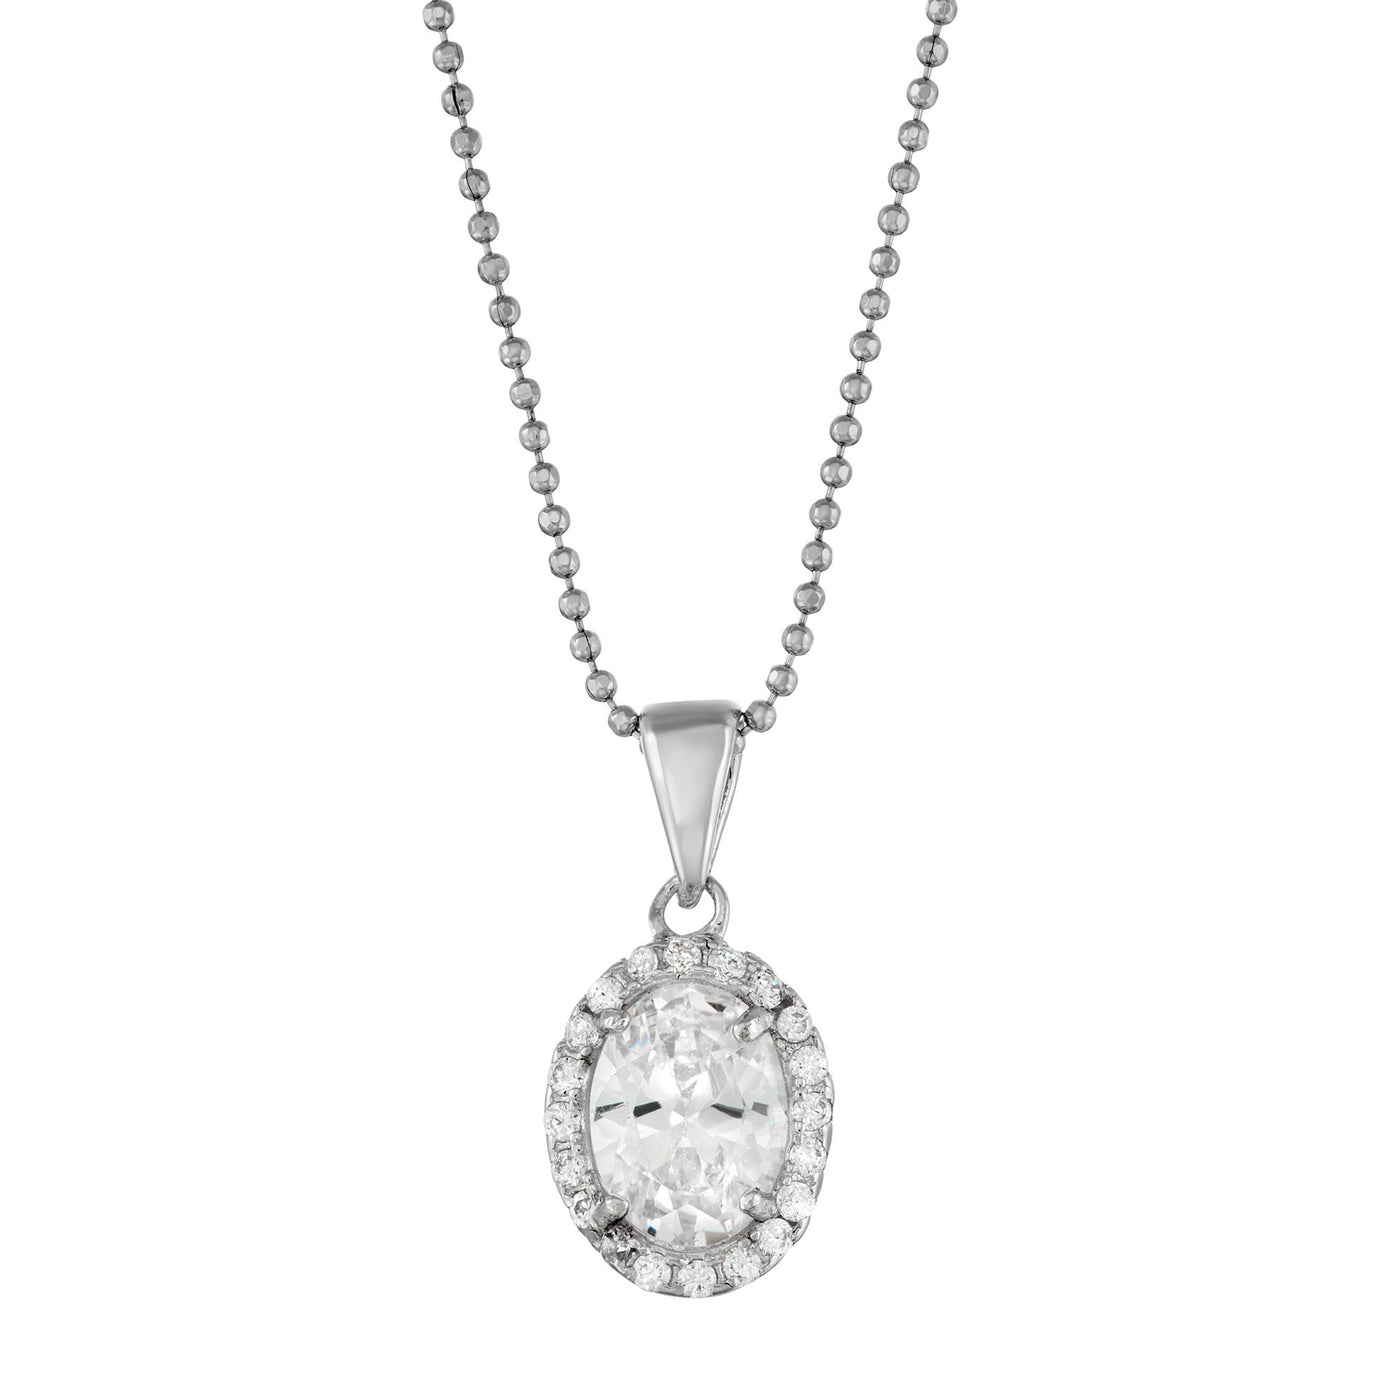 Rebecca Sloane Silver Oval With CZ And Faceted White CZ Pendant